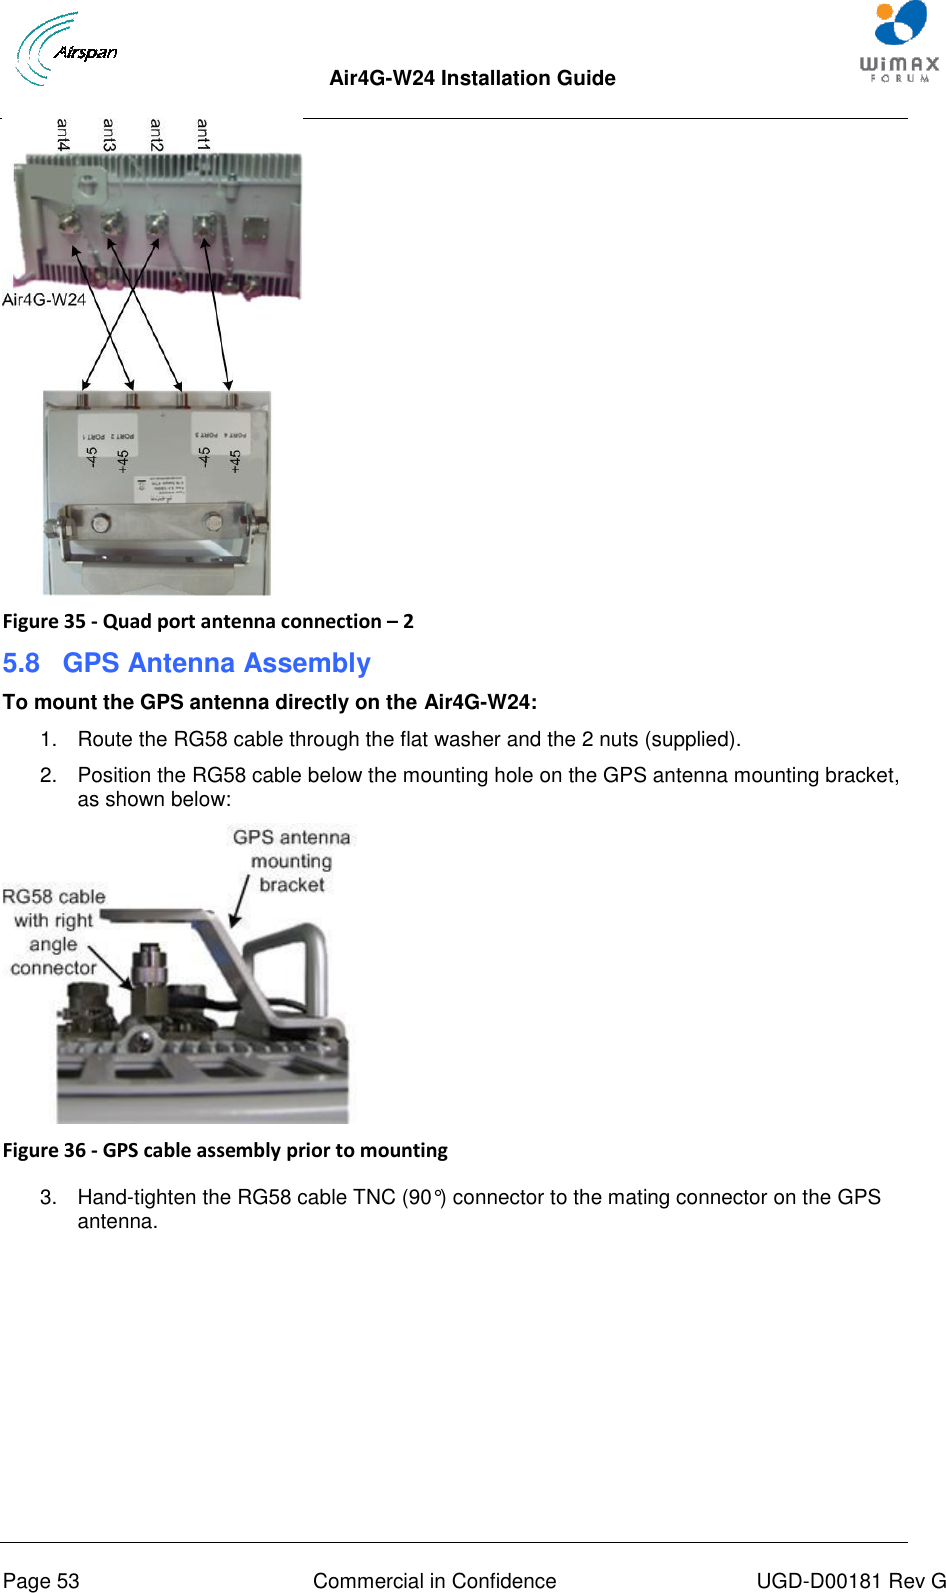  Air4G-W24 Installation Guide     Page 53  Commercial in Confidence  UGD-D00181 Rev G  Figure 35 - Quad port antenna connection – 2 5.8  GPS Antenna Assembly To mount the GPS antenna directly on the Air4G-W24: 1.  Route the RG58 cable through the flat washer and the 2 nuts (supplied). 2.  Position the RG58 cable below the mounting hole on the GPS antenna mounting bracket, as shown below:  Figure 36 - GPS cable assembly prior to mounting  3.  Hand-tighten the RG58 cable TNC (90°) connector to the mating connector on the GPS antenna. 